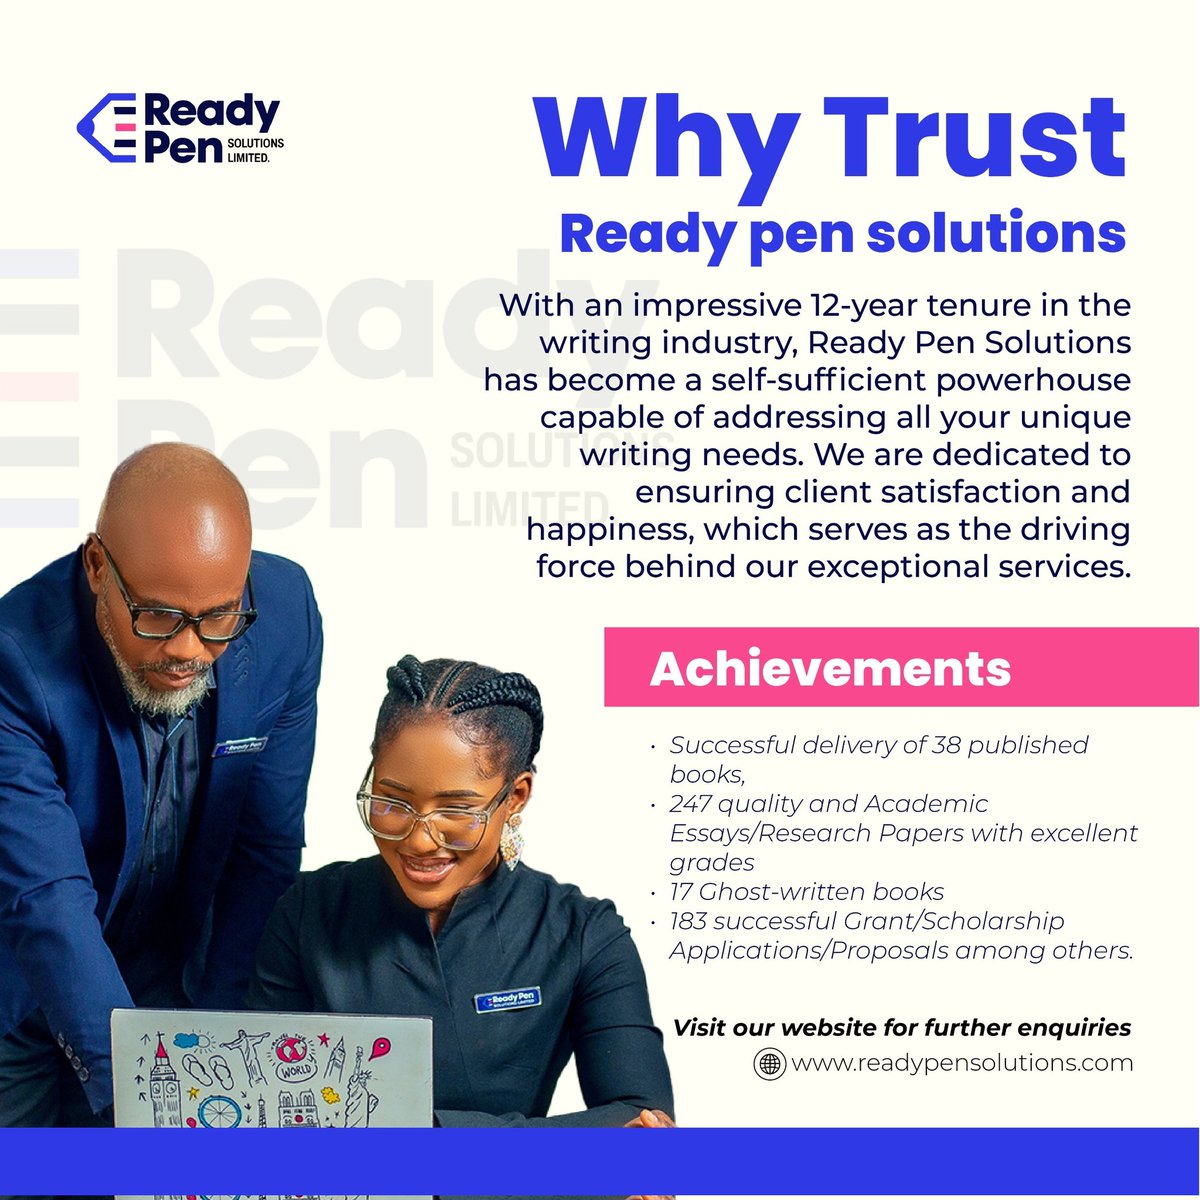 🖊️Ready Pen Solutions is a reputable and trusted writing service provider with over 12 years of experience. 
Contact Ready Pen Solutions today for exceptional writing solutions tailored to your needs.💯

#readypensolutions #writing #writingindustry #clientsatisfaction #books